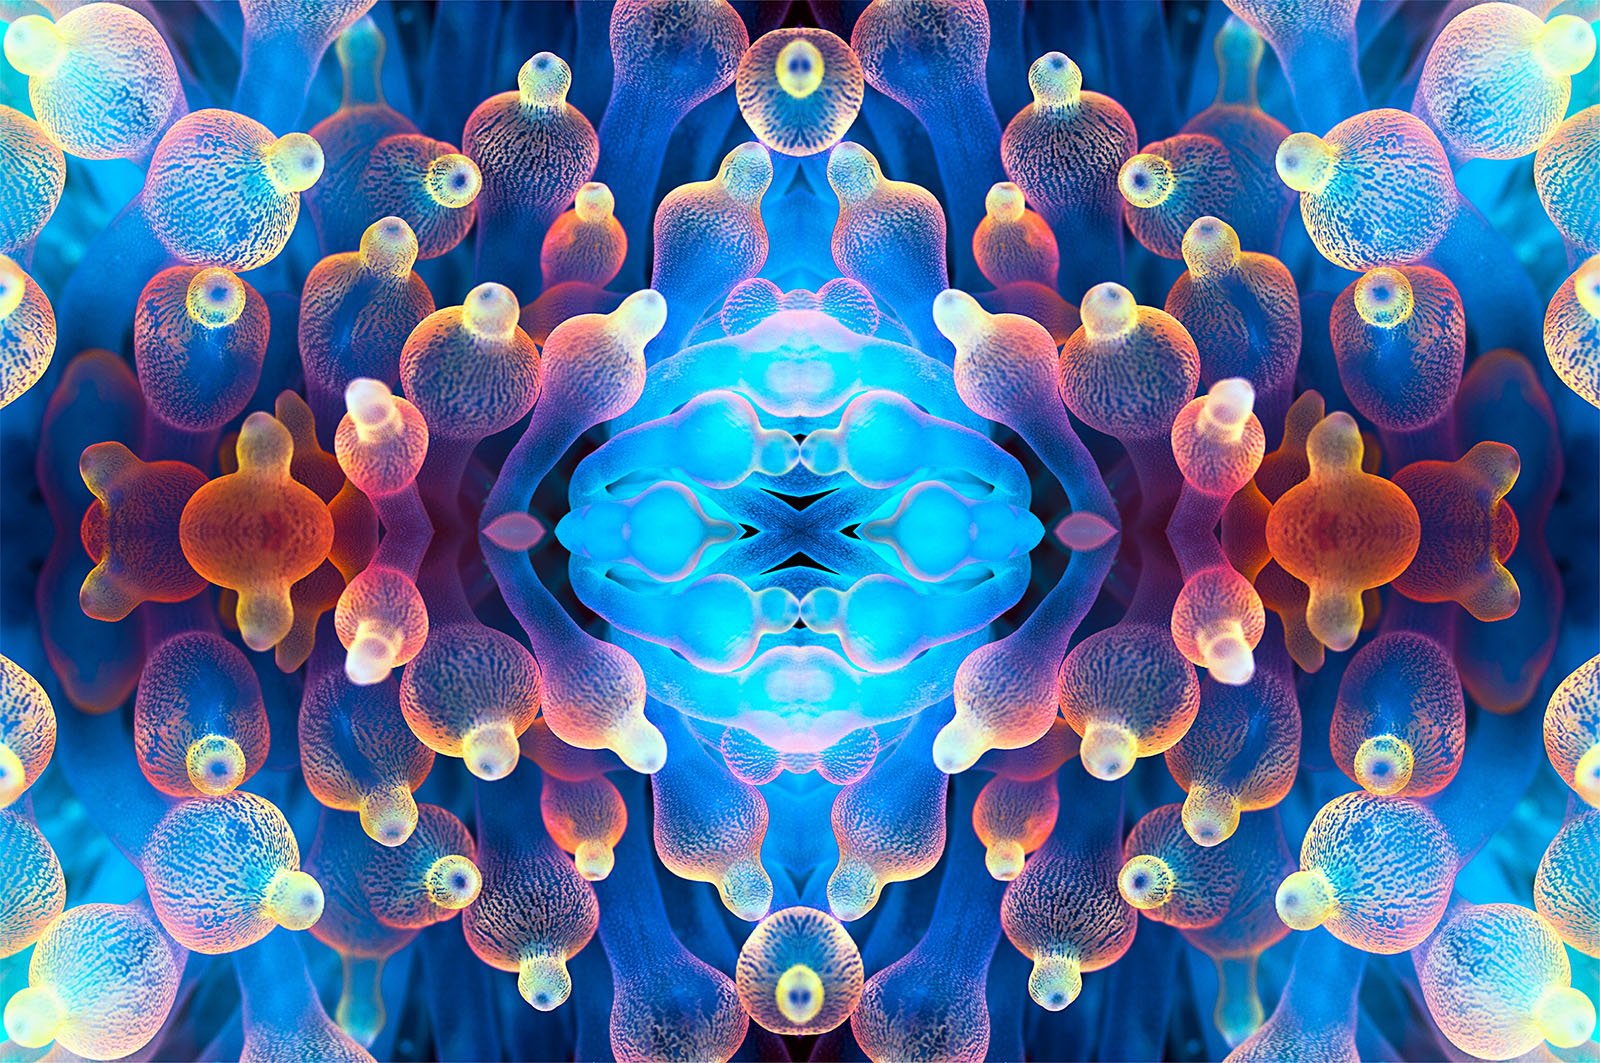 A vibrant, symmetrical abstract design features numerous bulbous shapes in various colors, including blue, red, orange, and yellow. The shapes are textured and appear to overlap, creating a kaleidoscopic, mirrored pattern against a dark blue background.